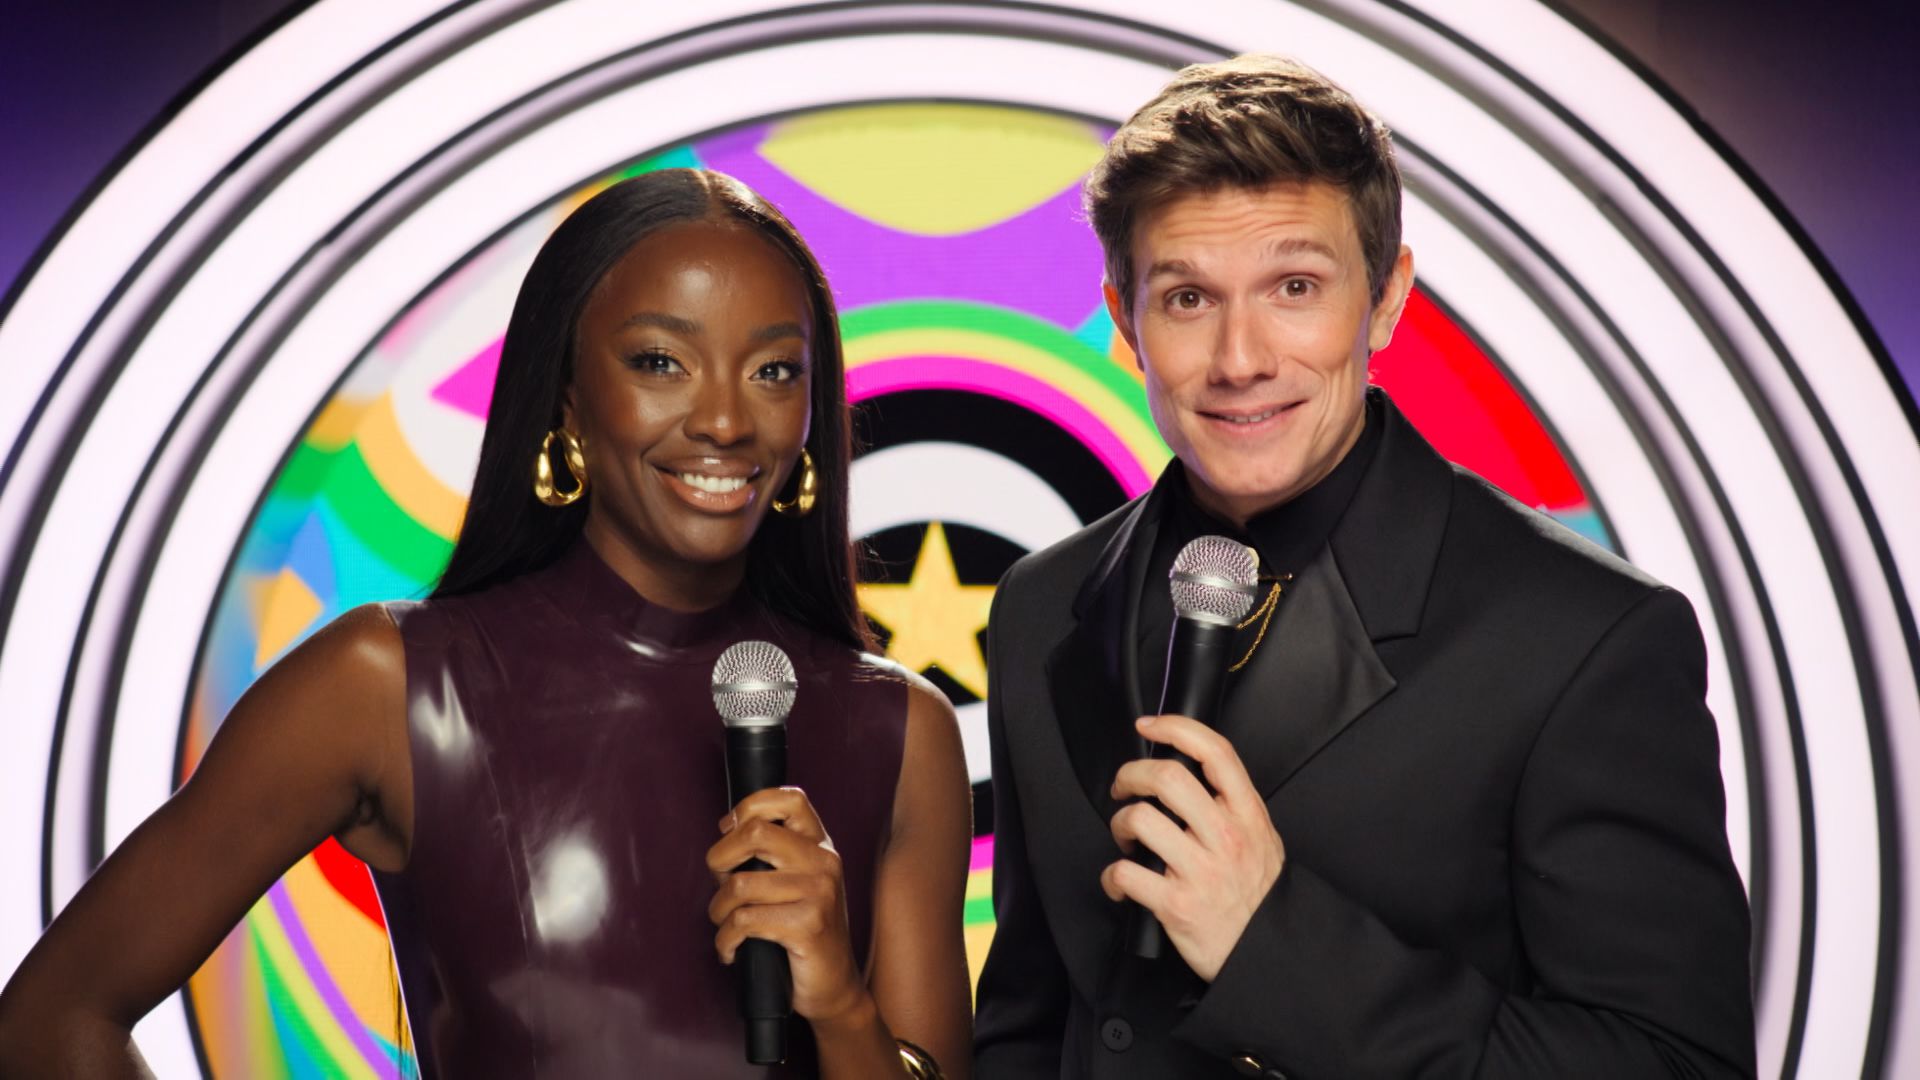 ITV teases new Celebrity Big Brother series with brand-new trailer [Video]